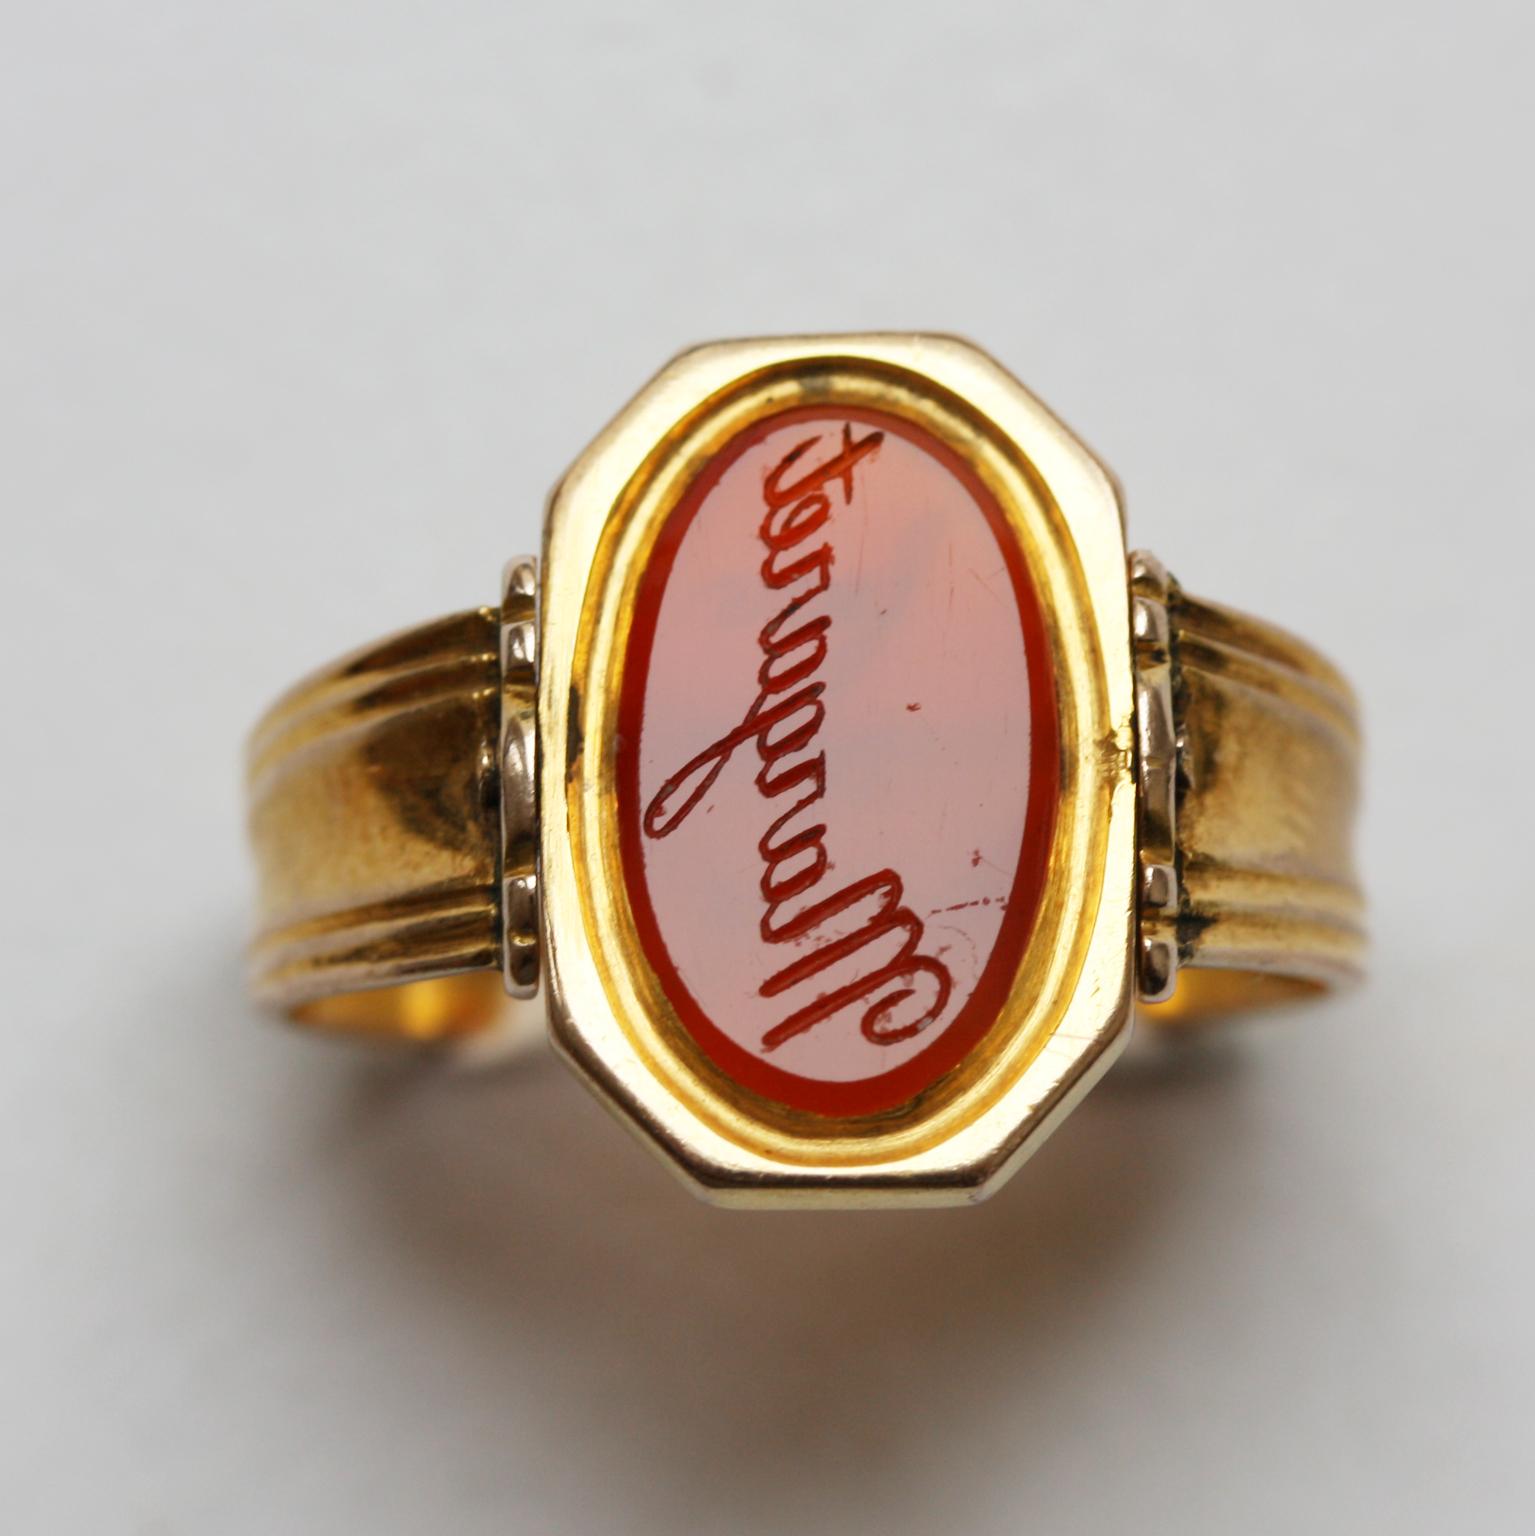 An 18 carat gold swivel ring with a flat oval carnelian, both sided engraved in reverse on one side with the name, Margaret and on the other side with the text “Crack without fear” which means that you should not be afraid to make a joke.

ring